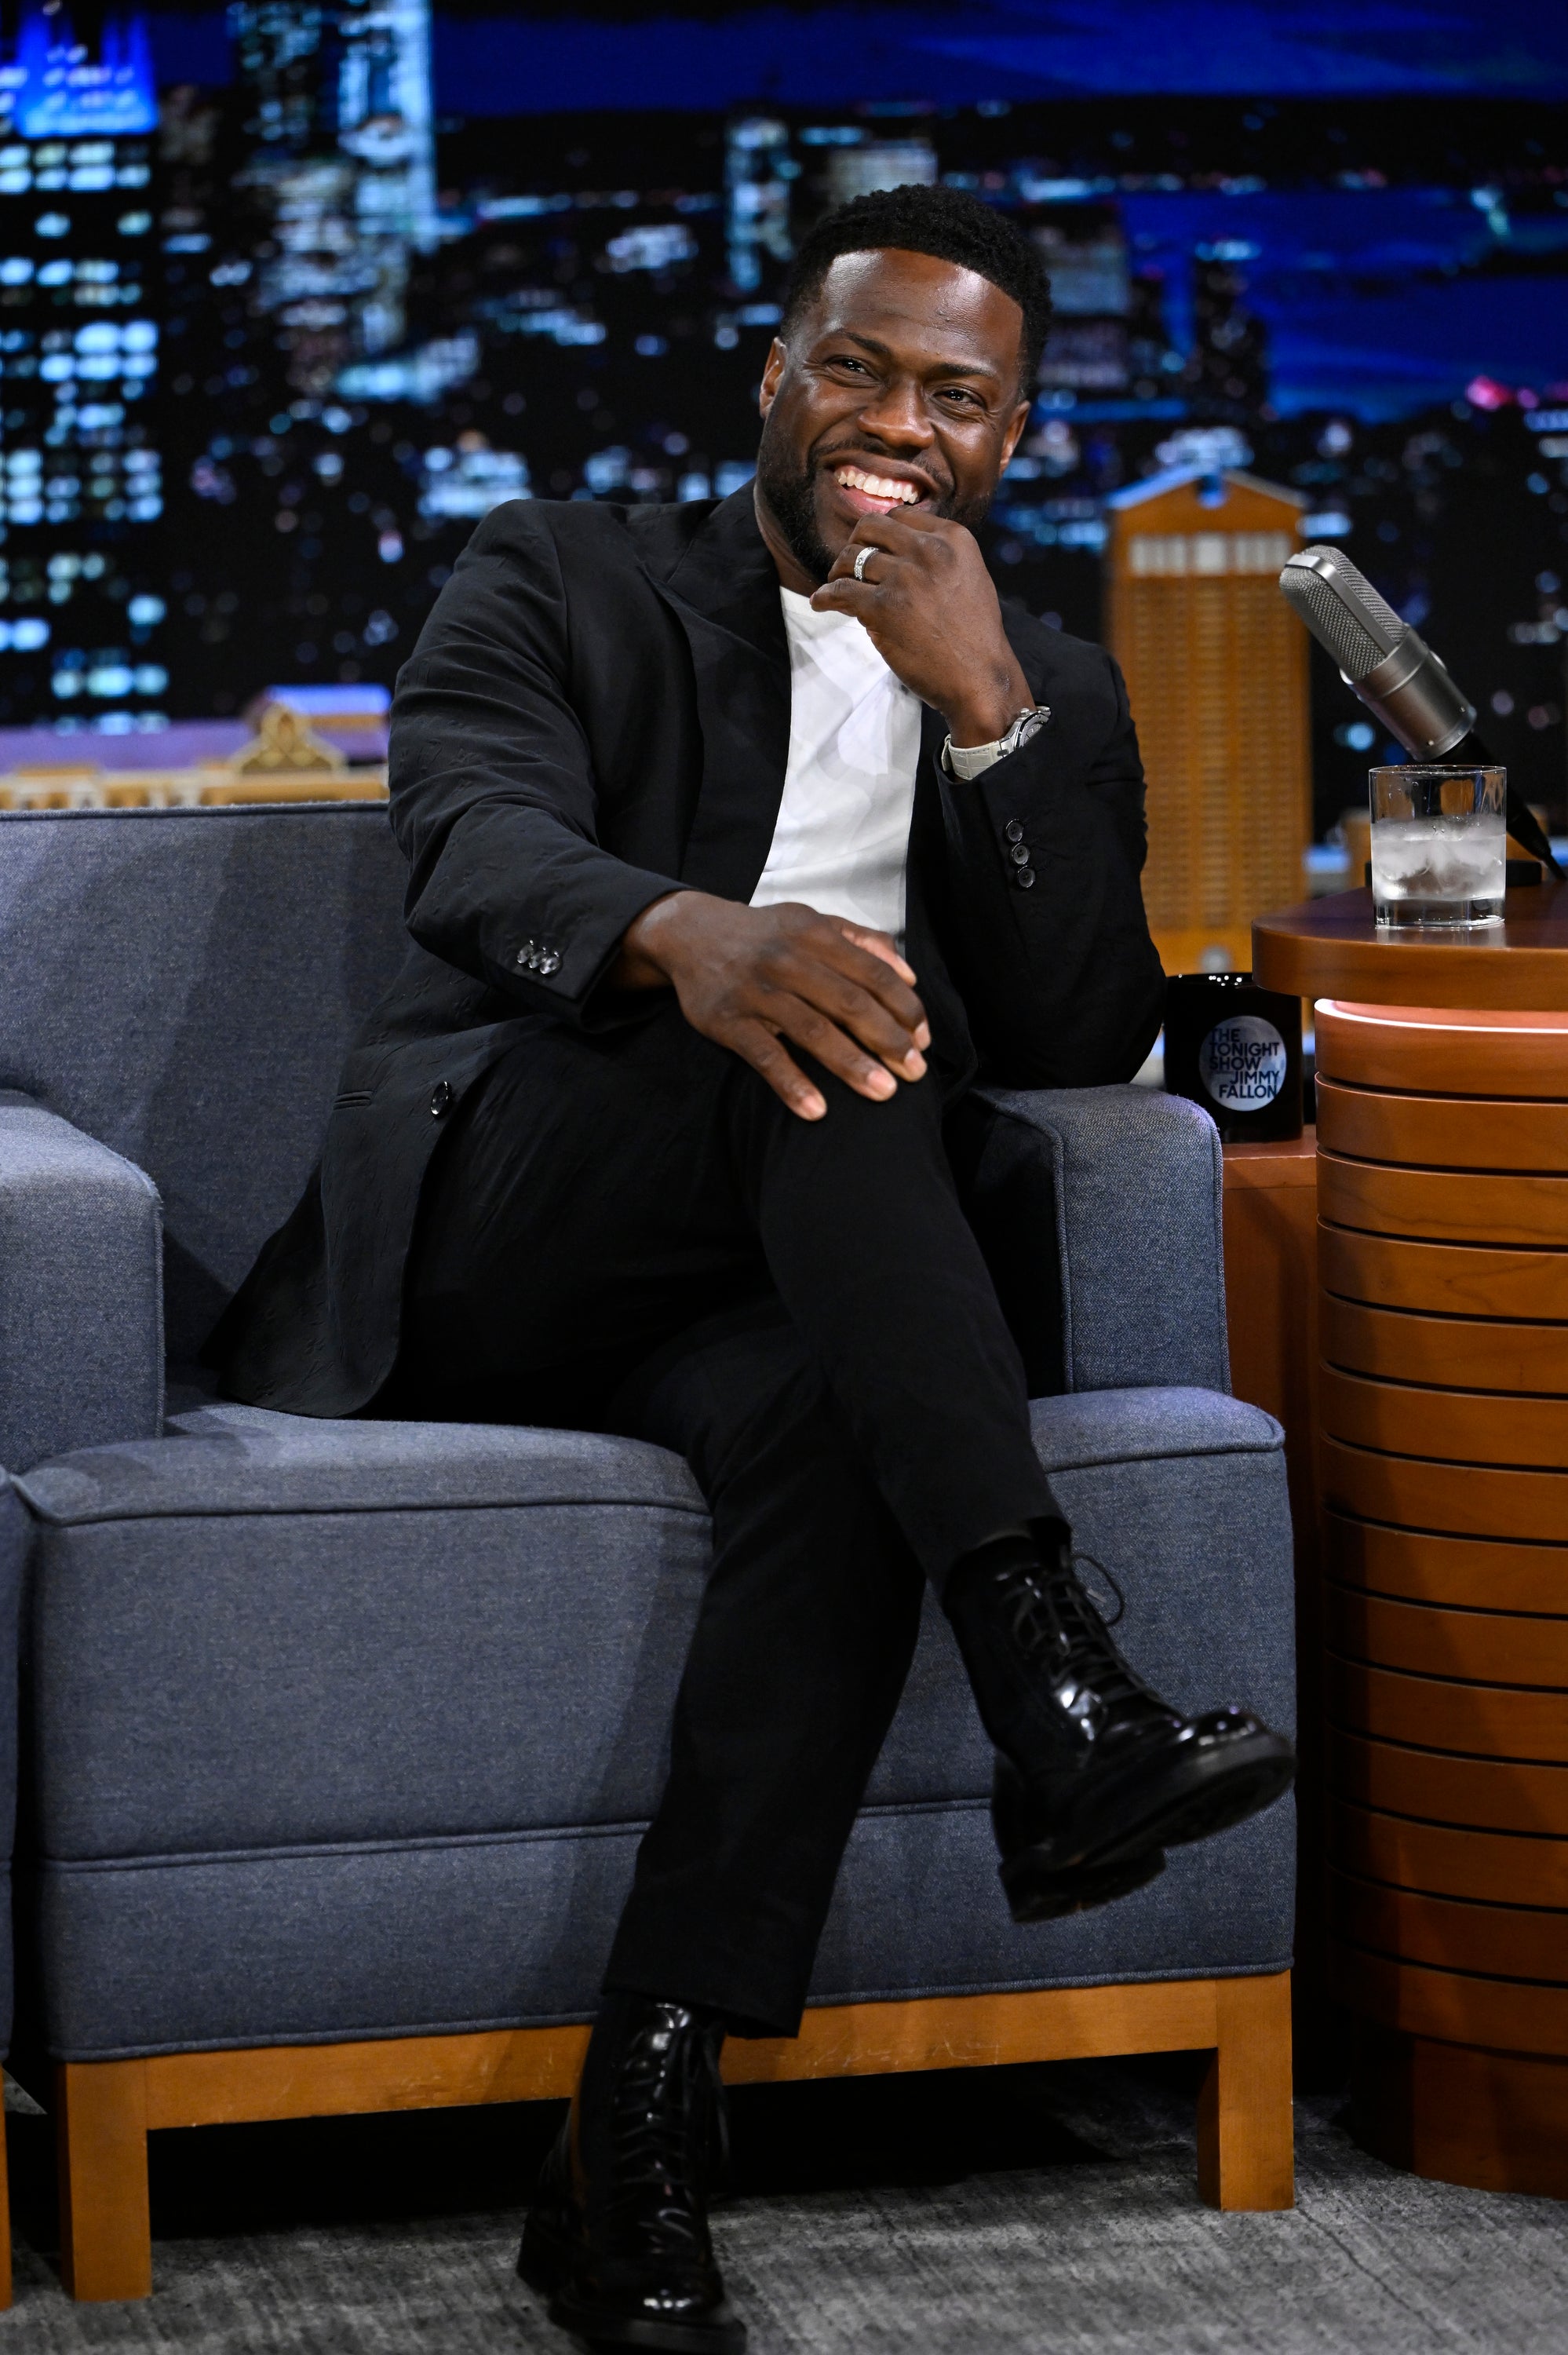 Introducir 120+ imagen kevin hart selling shoes - Abzlocal.mx